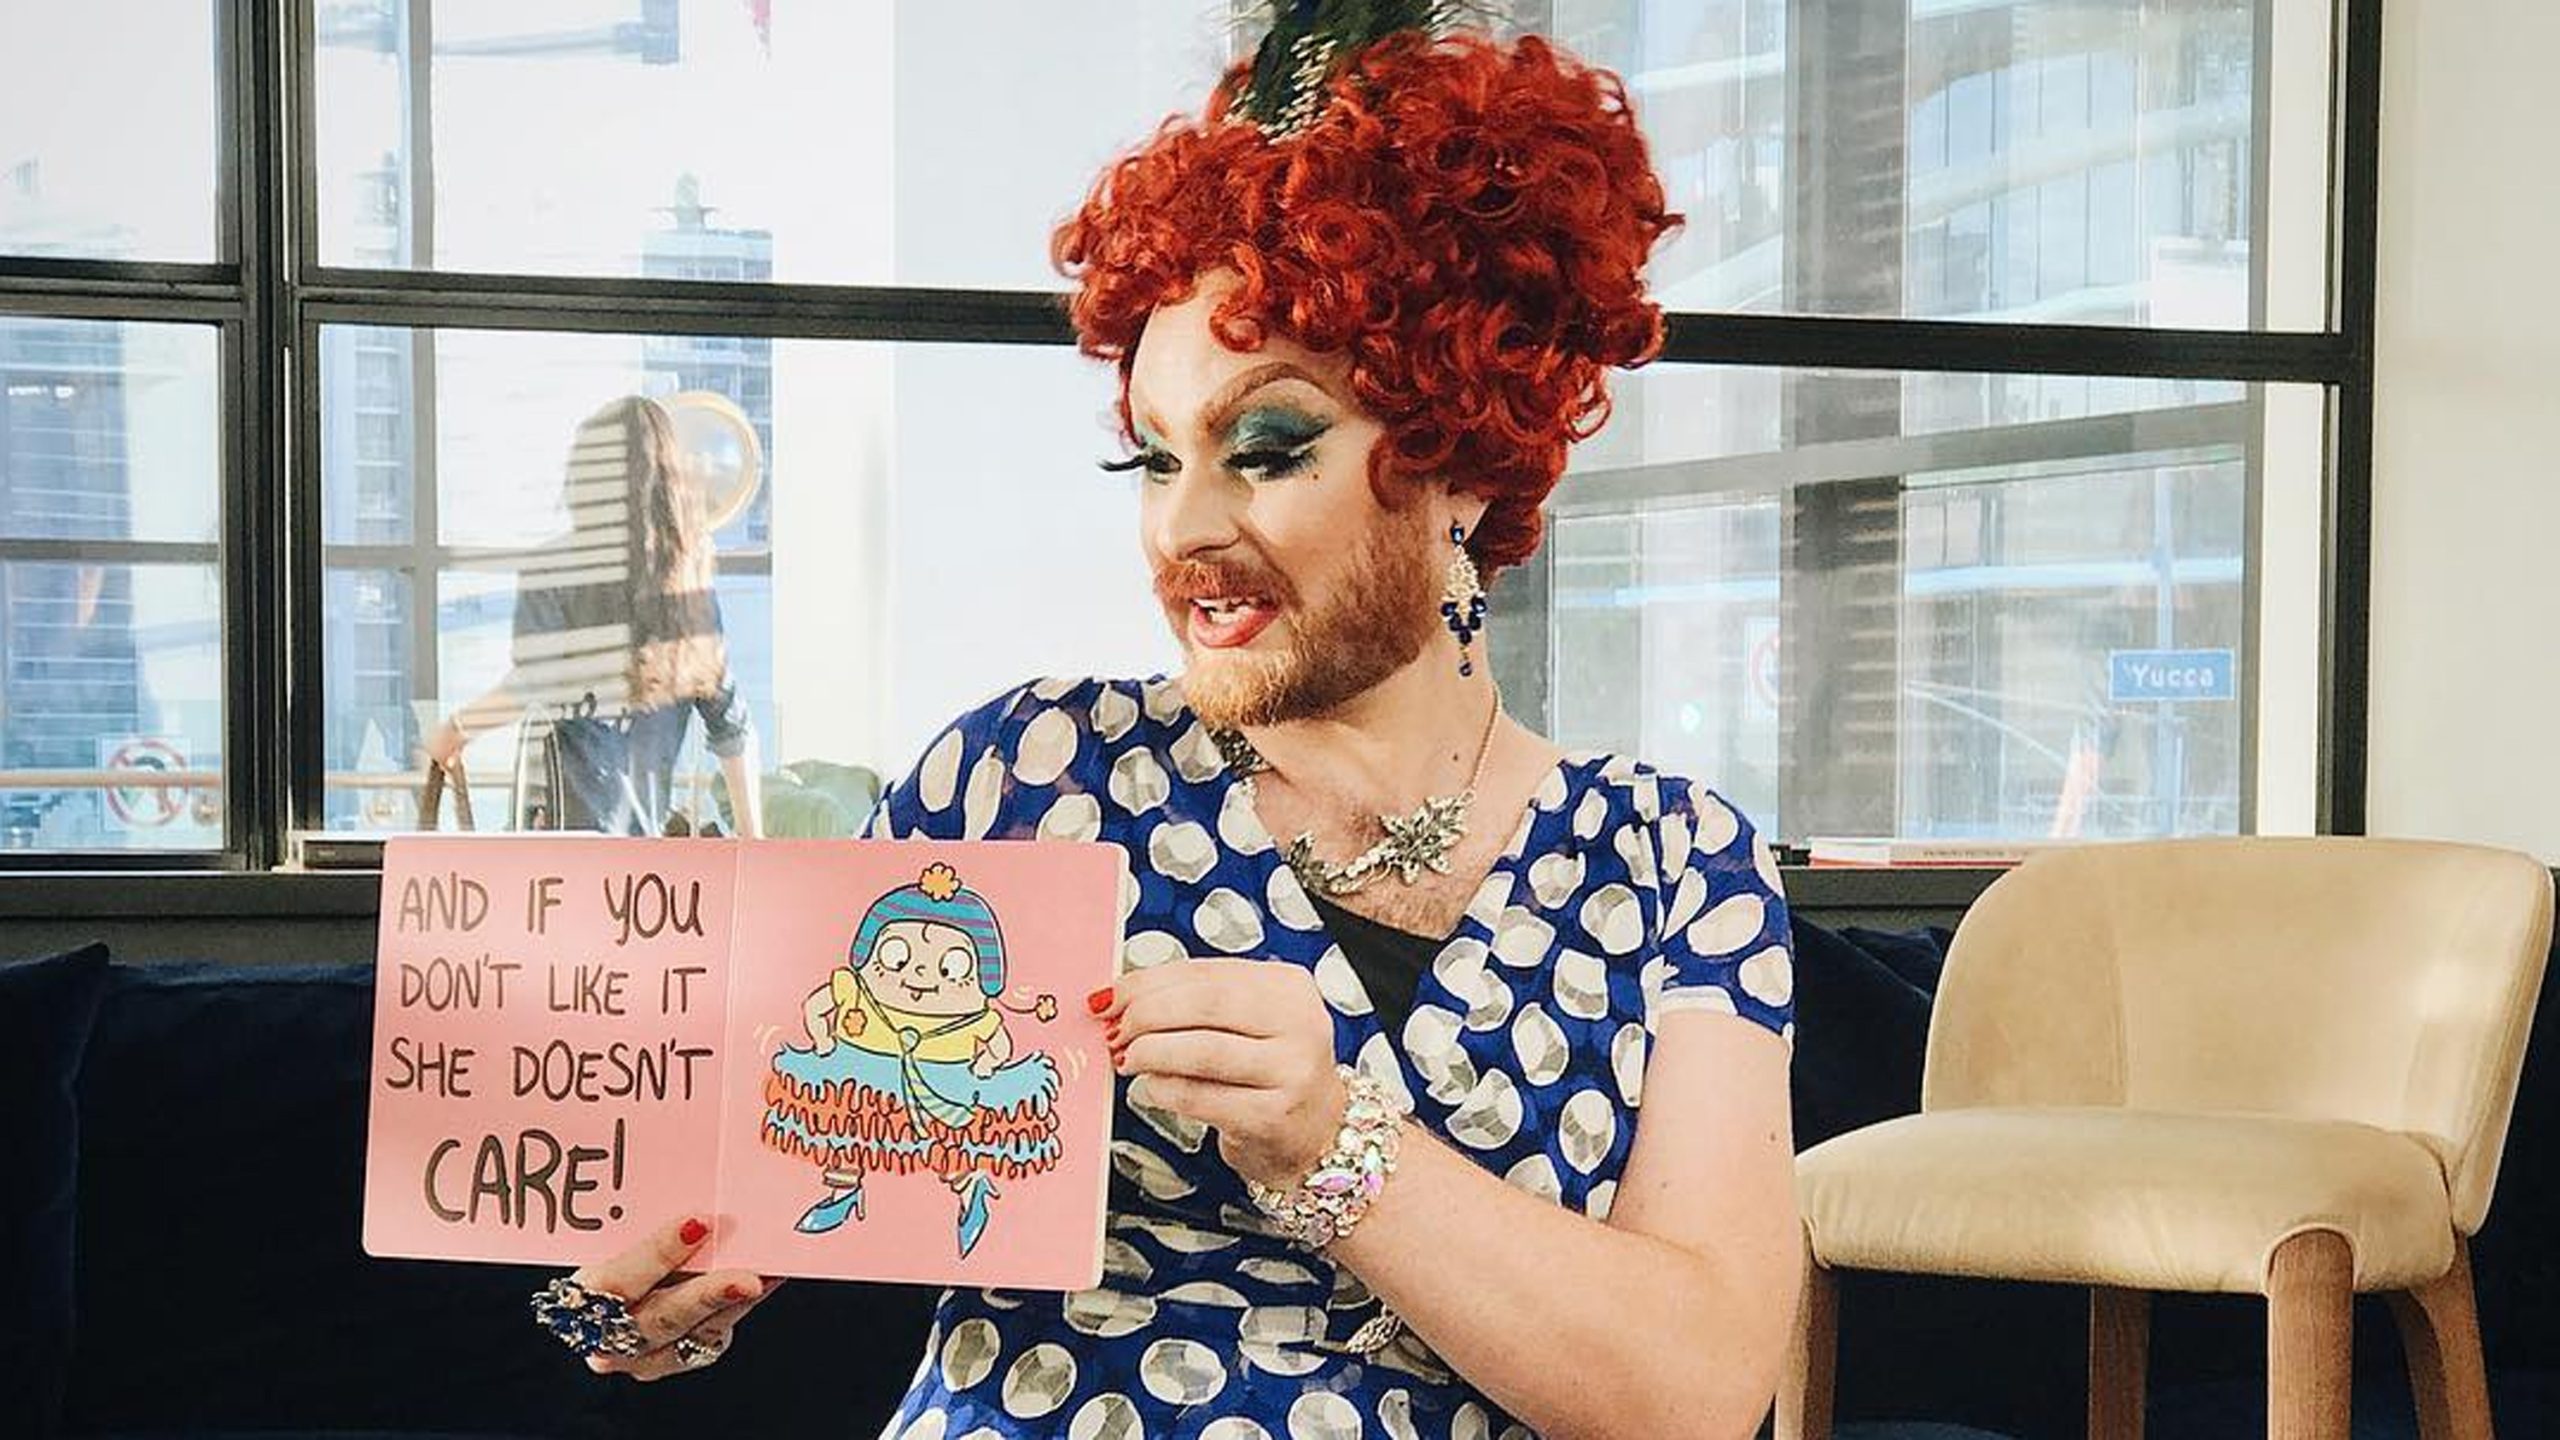 The simple reasons parents want to shut down Drag Queen Story Hour